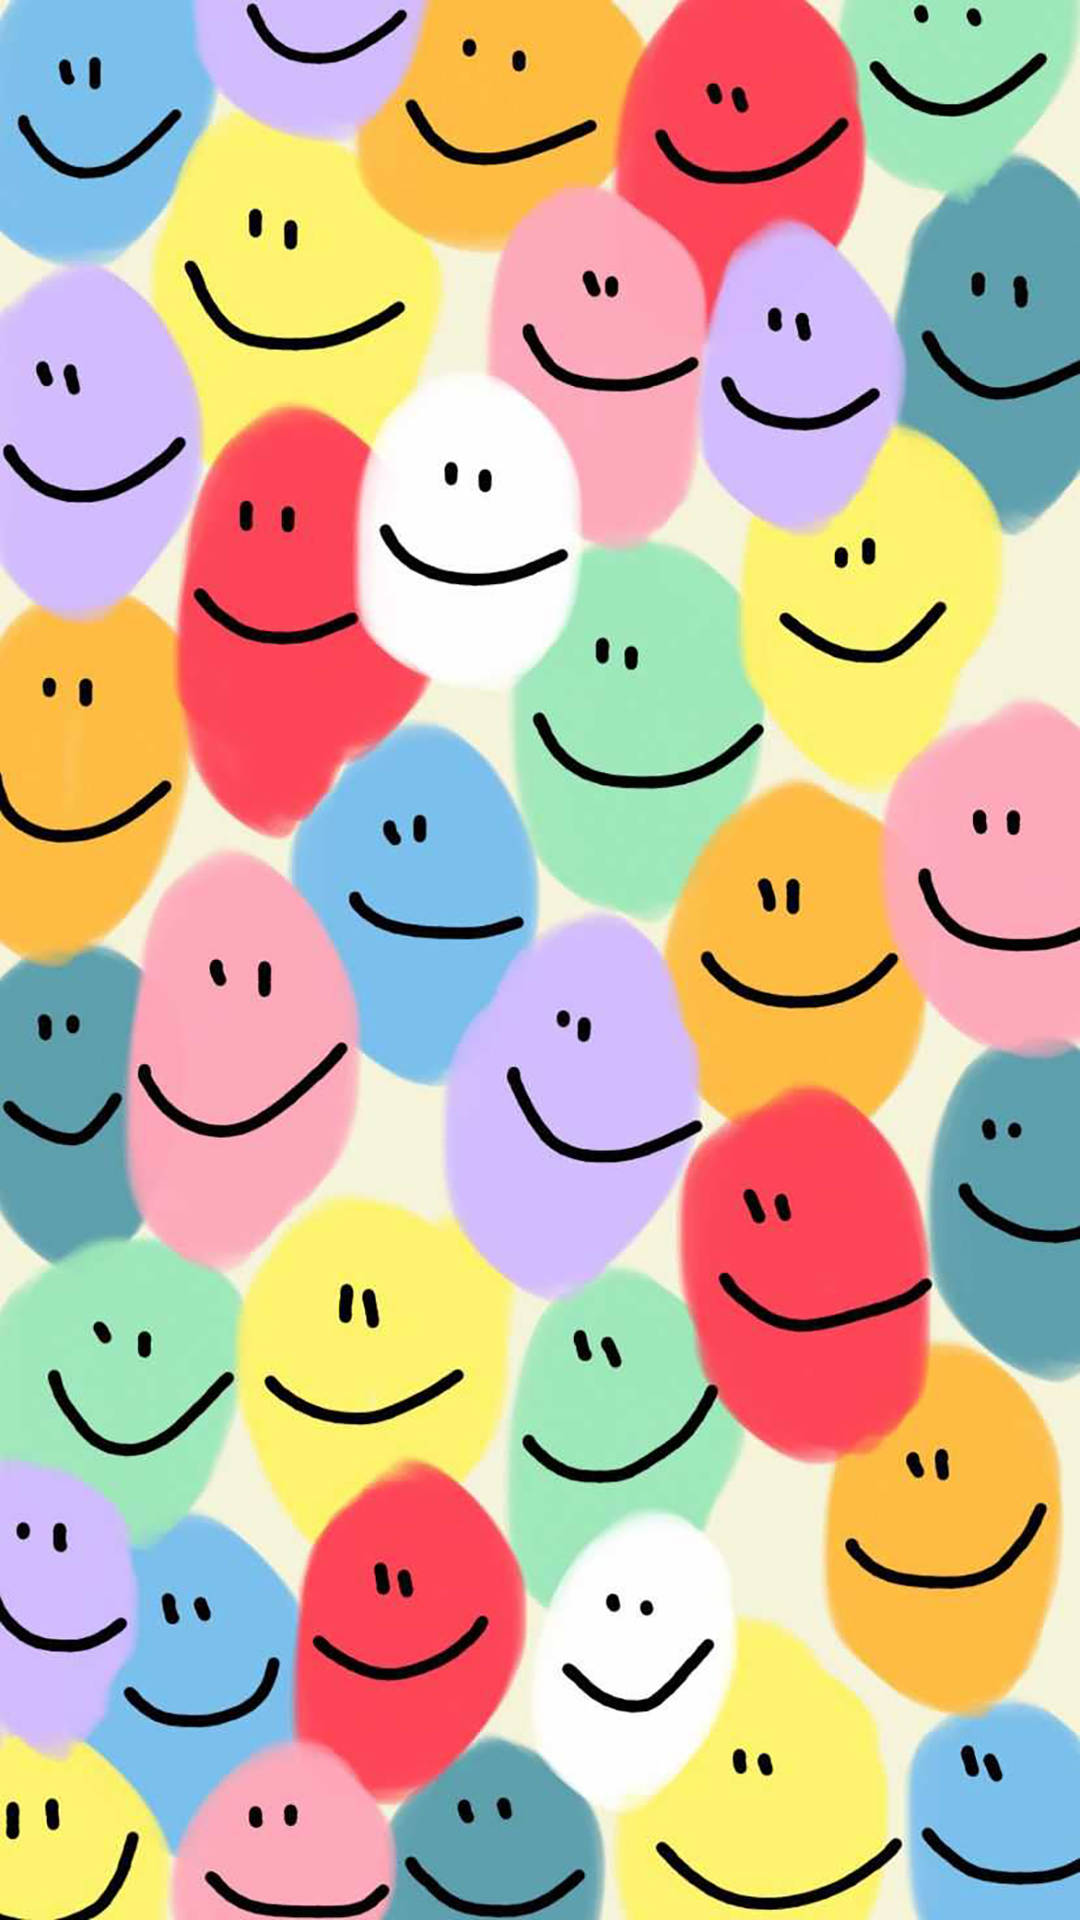 smiley face aesthetic wallpaper  Hipster wallpaper Desktop wallpaper art  Phone wallpaper patterns